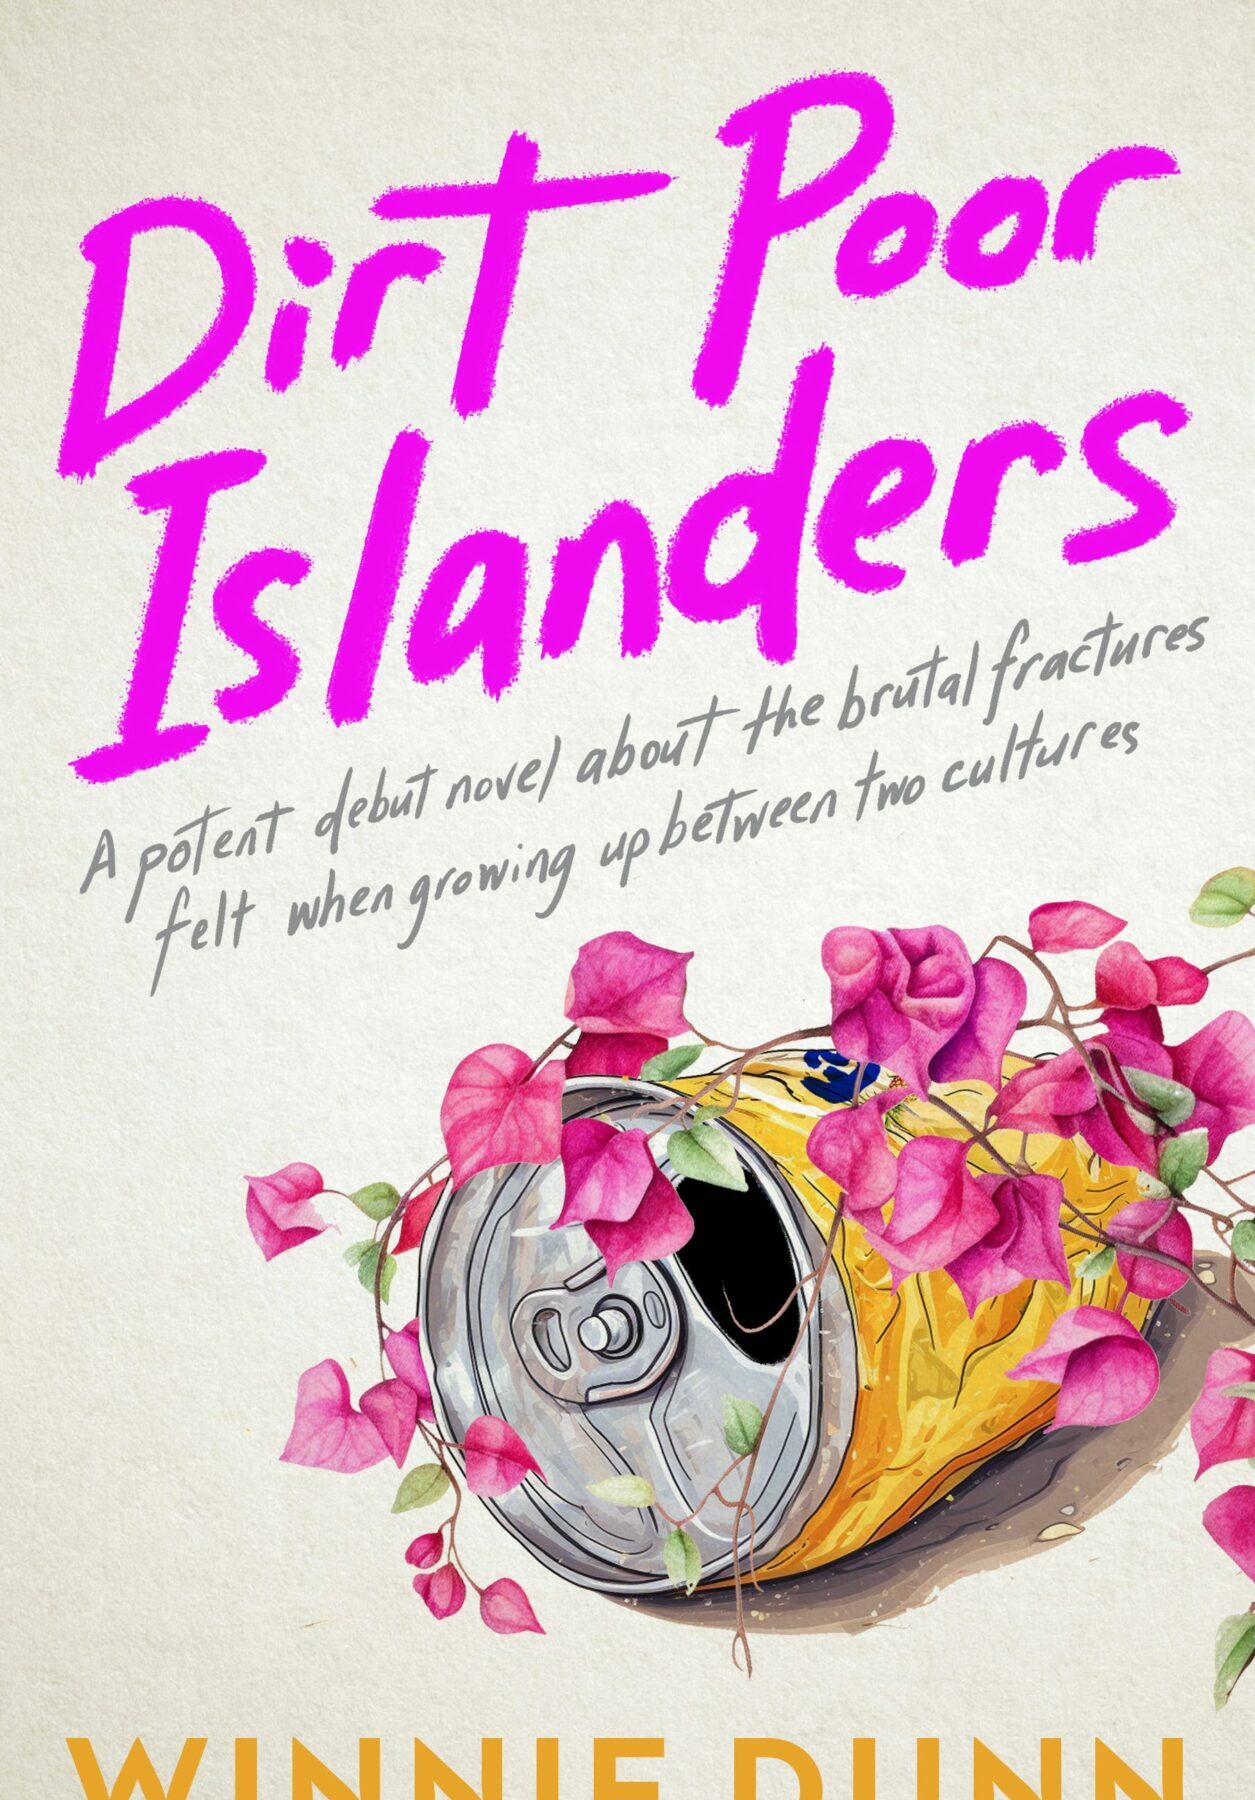 A book cover featuring an illustration of a drink can lying on the ground and a pink-leaved plant growing over the top of it. The title is in pink letters across the top third, and the author's name in yellow at the bottom